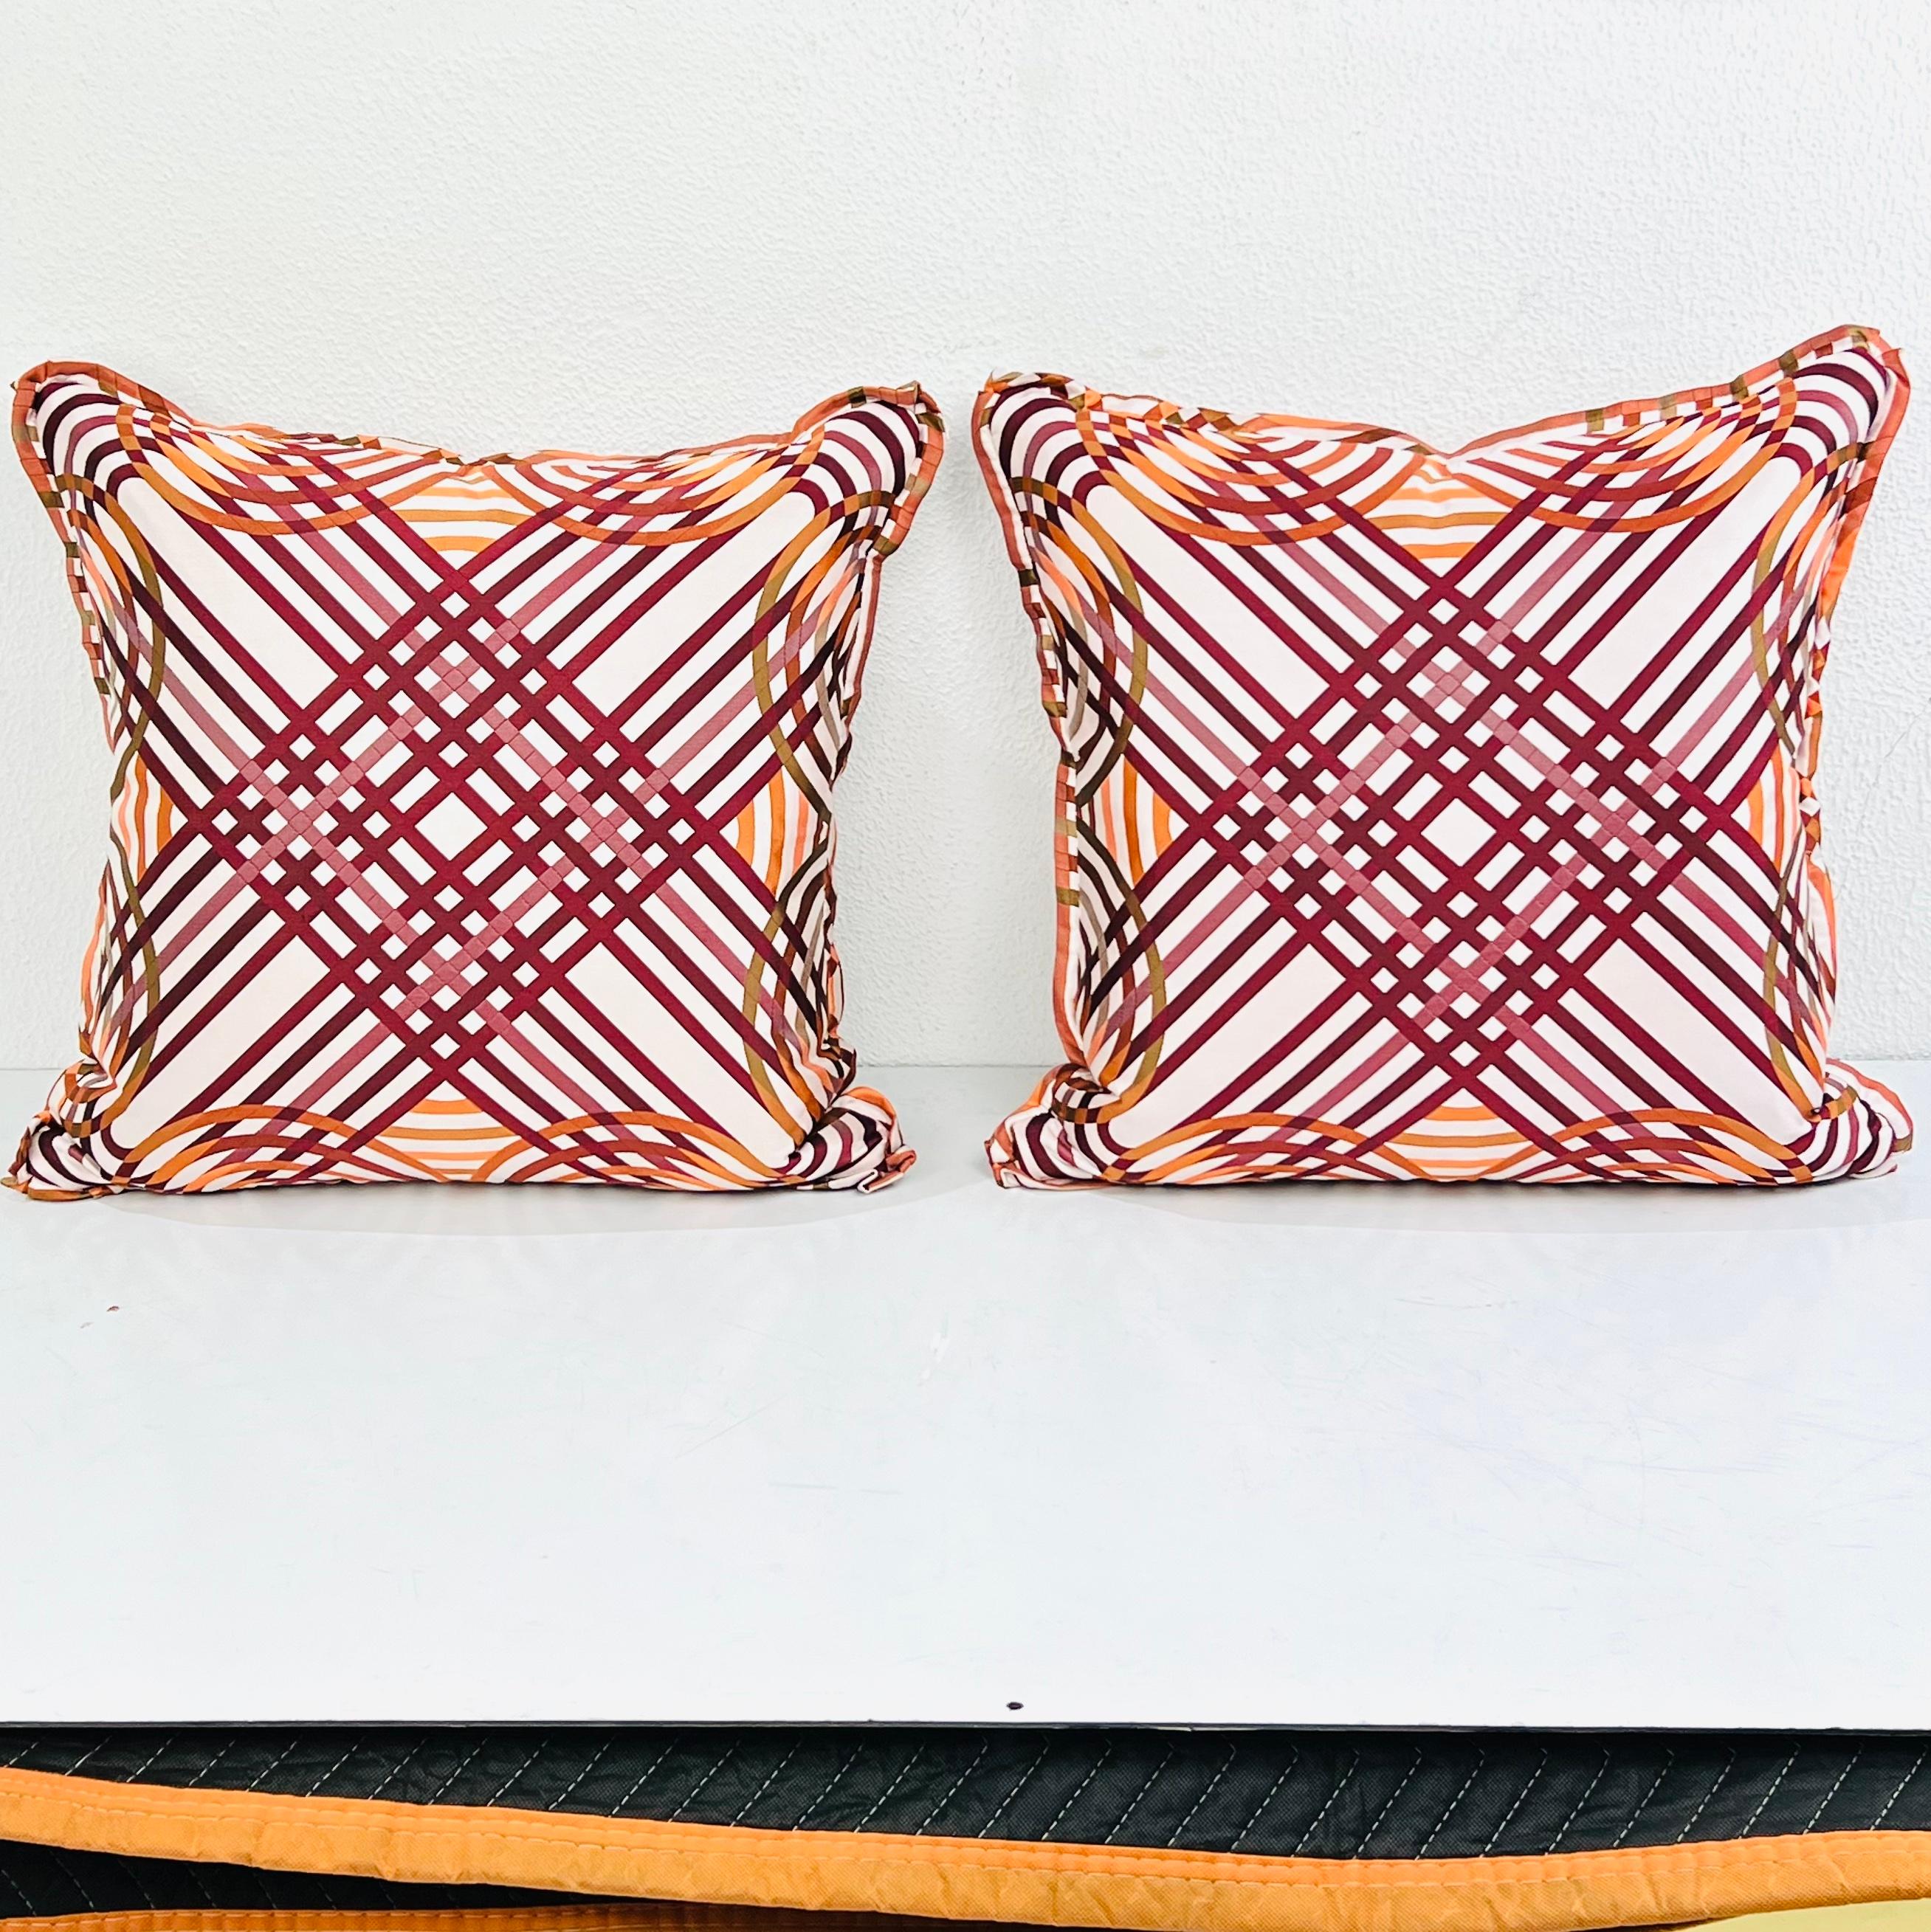 Pair of down pillows upholstered in exquisite limited edition 